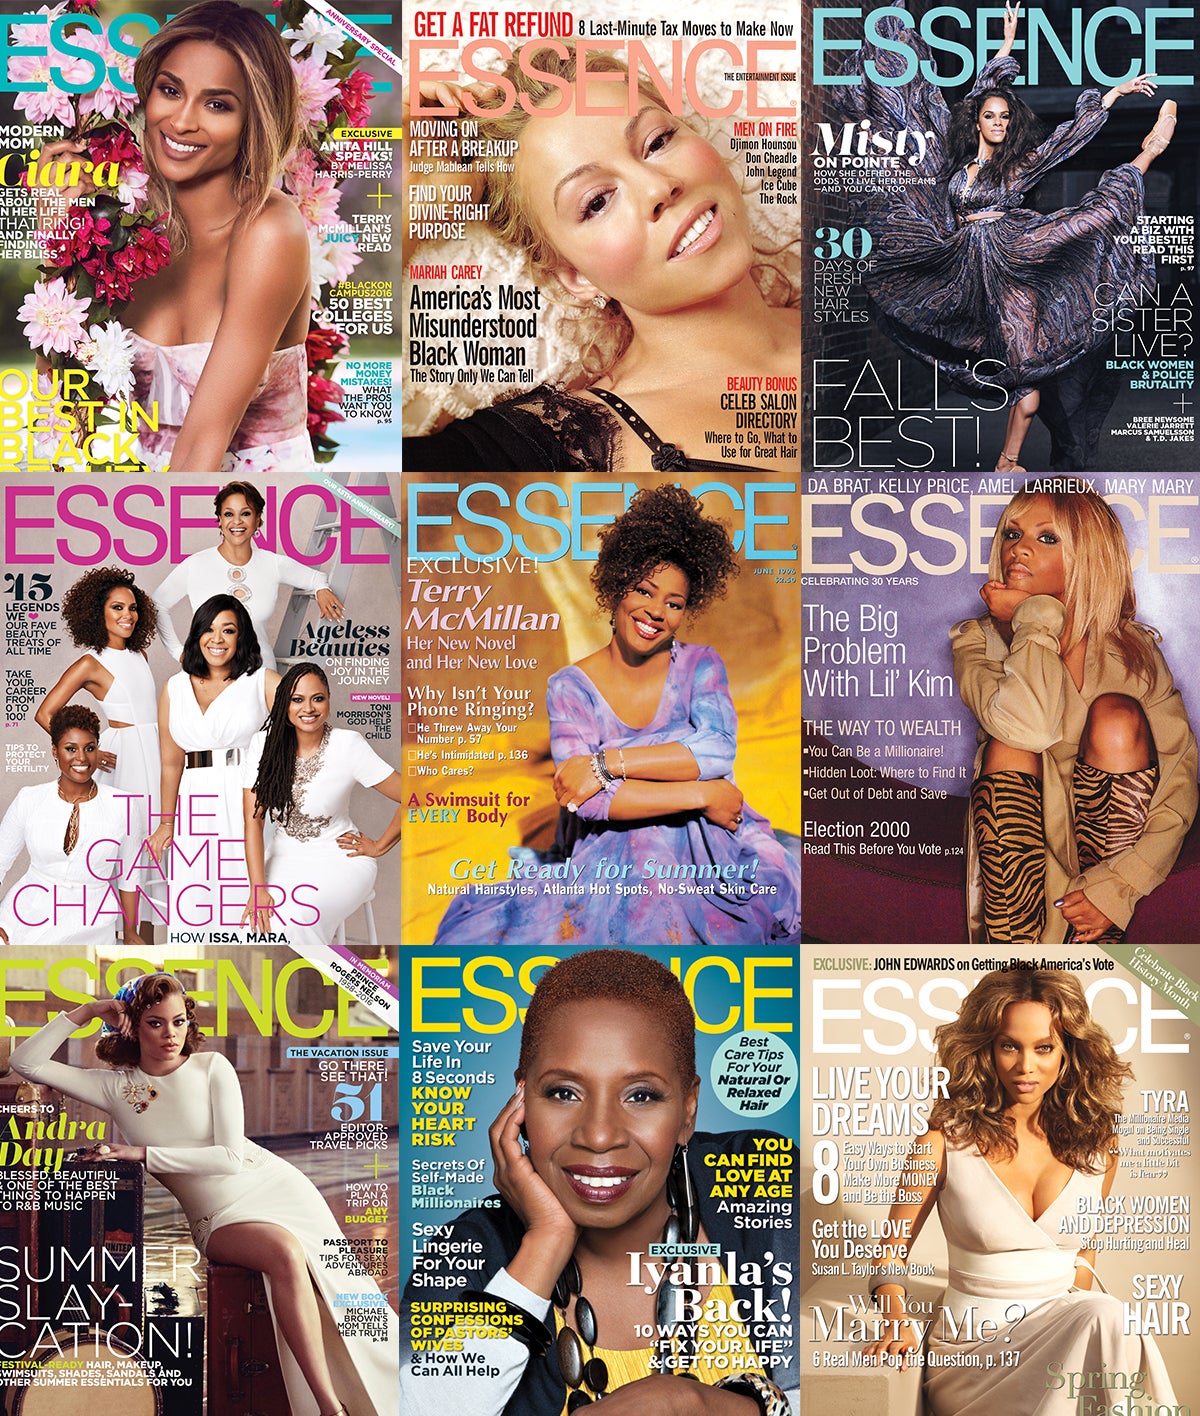 Throwback Thursday: ESSENCE Festival 2016 Artists’ Past ESSENCE Covers